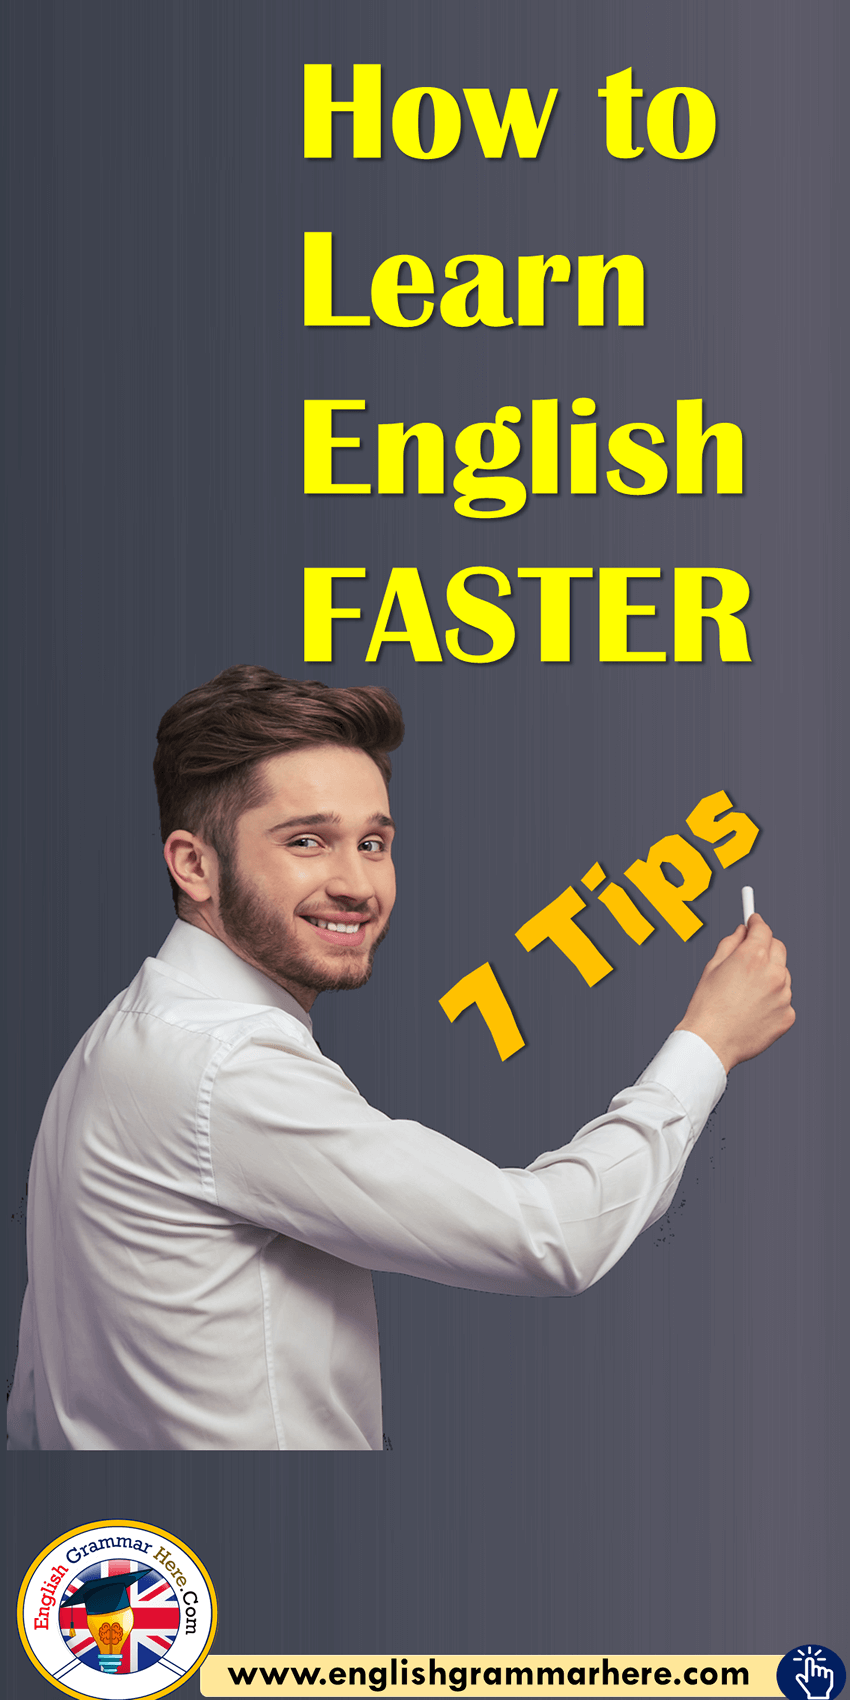 How to Learn English FASTER, 7 Tips